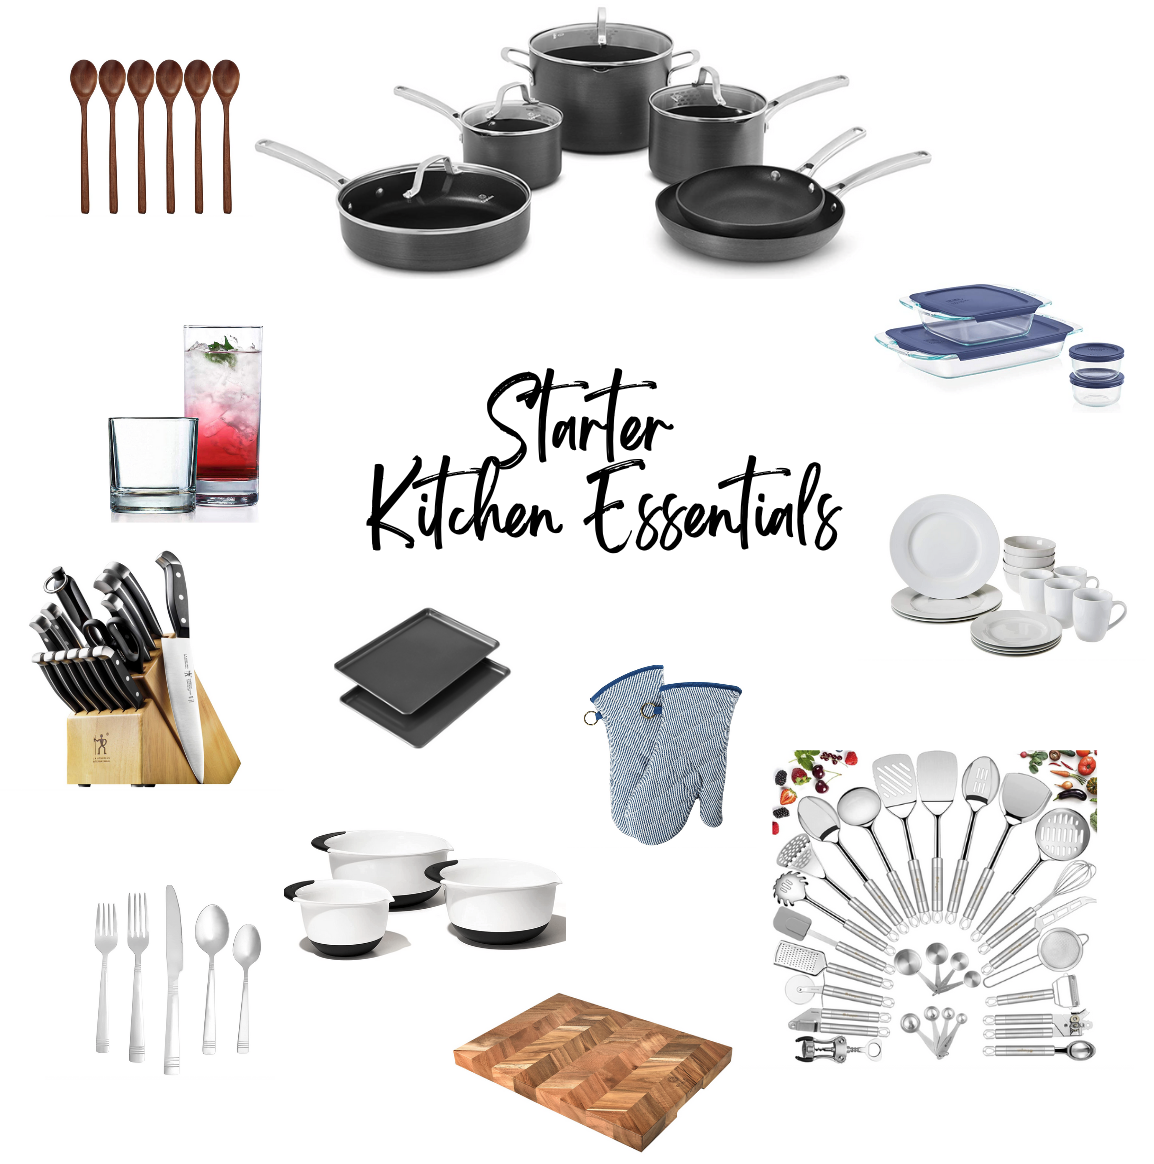 21 College Kitchen Essentials For Basic Cooking and Meal Prep